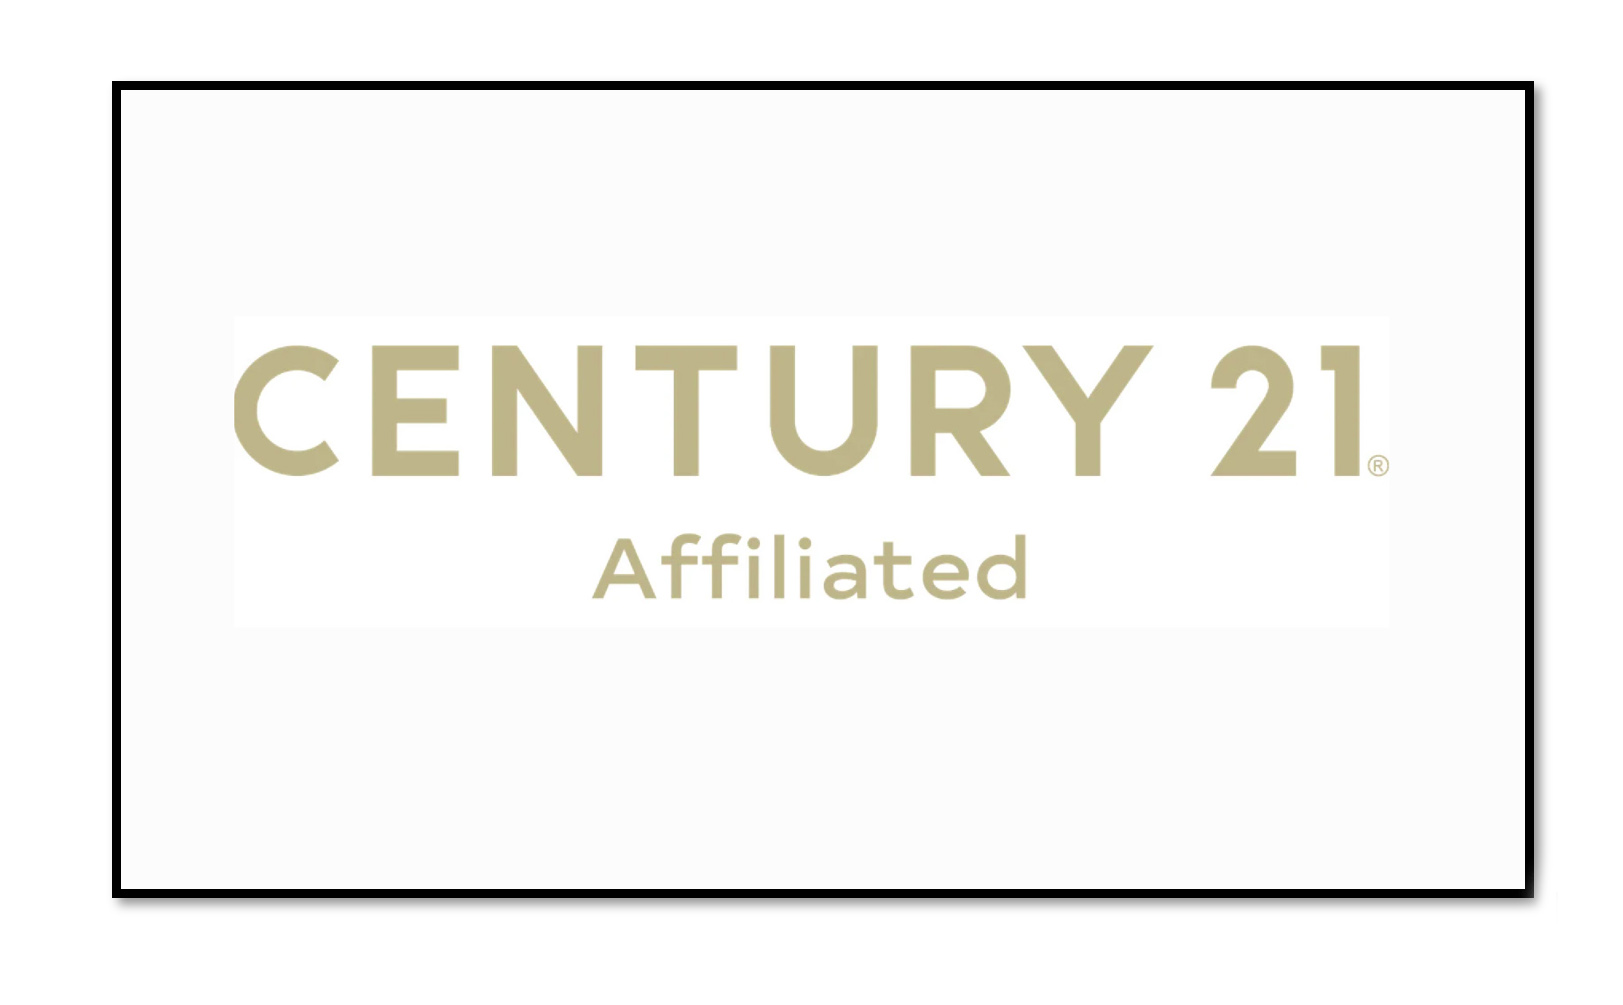 Welcome to CENTURY 21 Affiliated